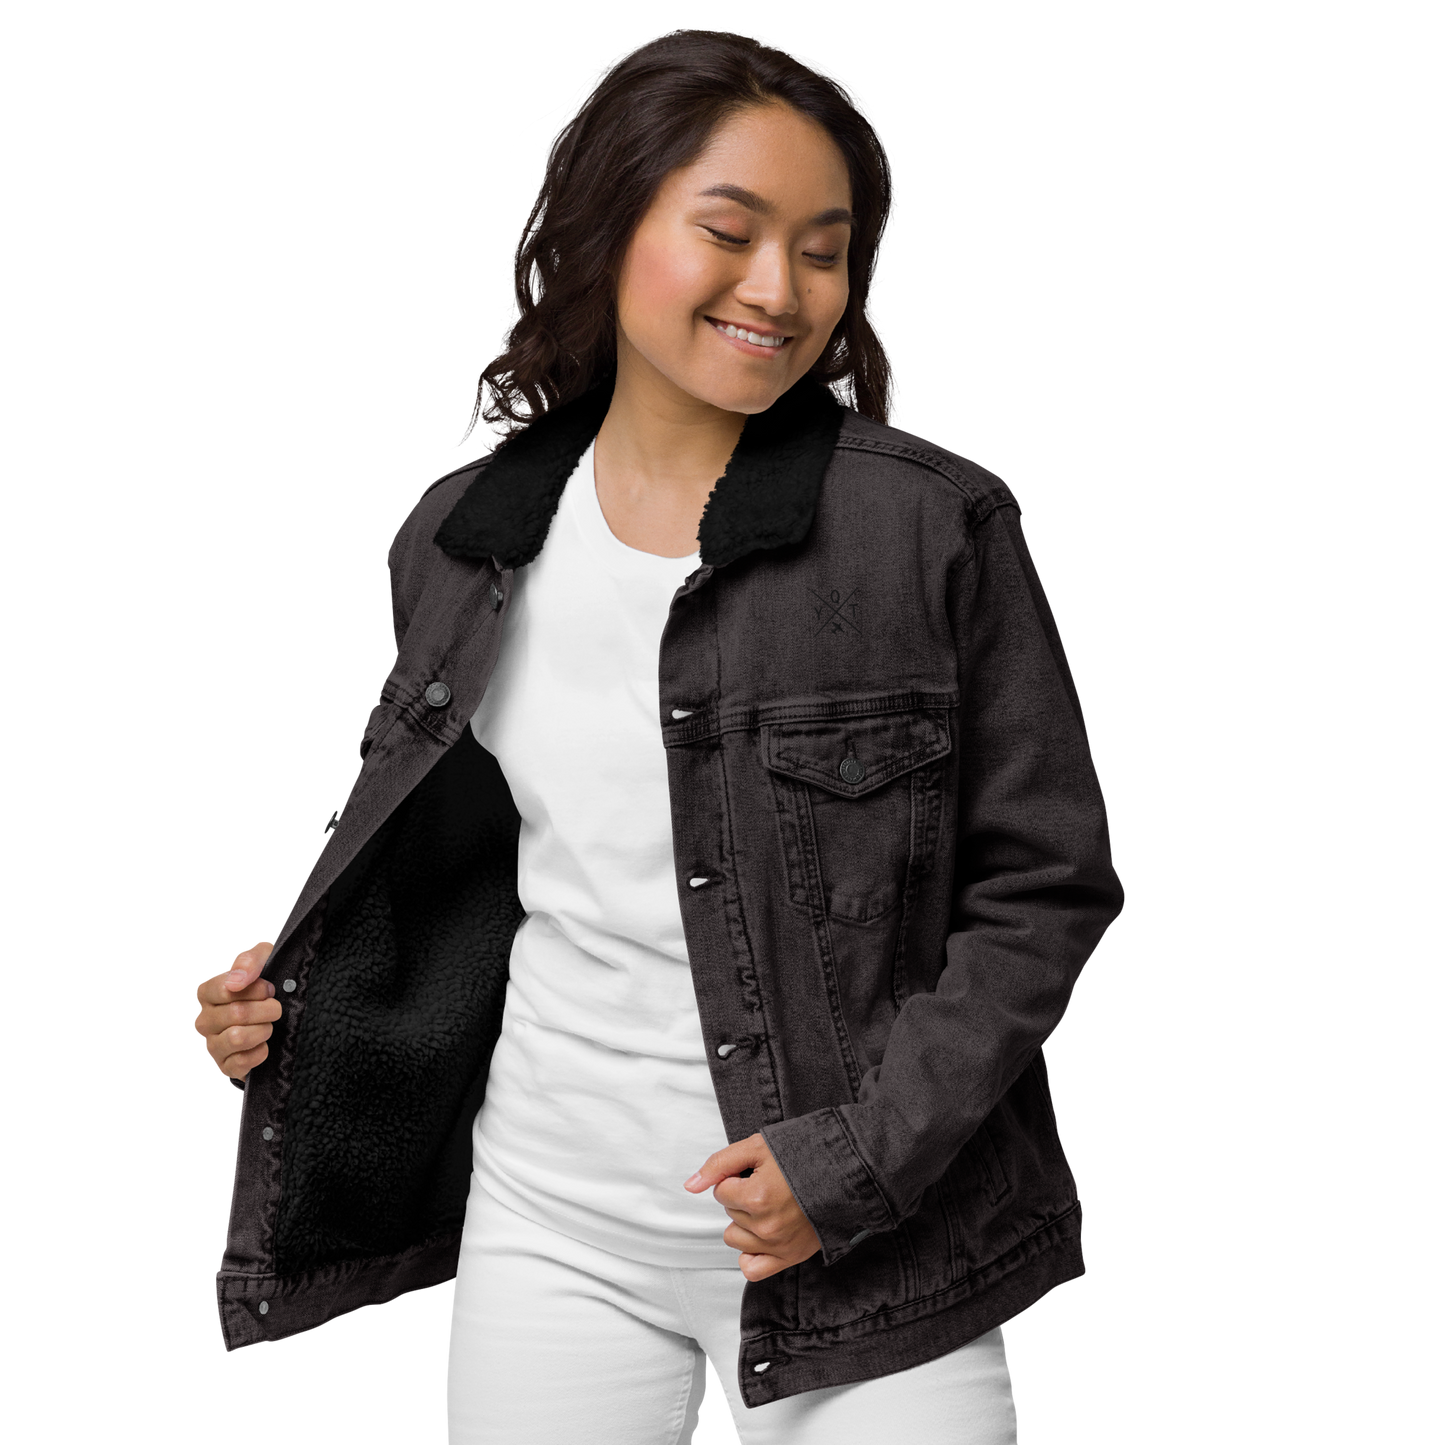 YHM Designs - YQT Thunder Bay Denim Sherpa Jacket - Crossed-X Design with Airport Code and Vintage Propliner - Black & White Embroidery - Image 05